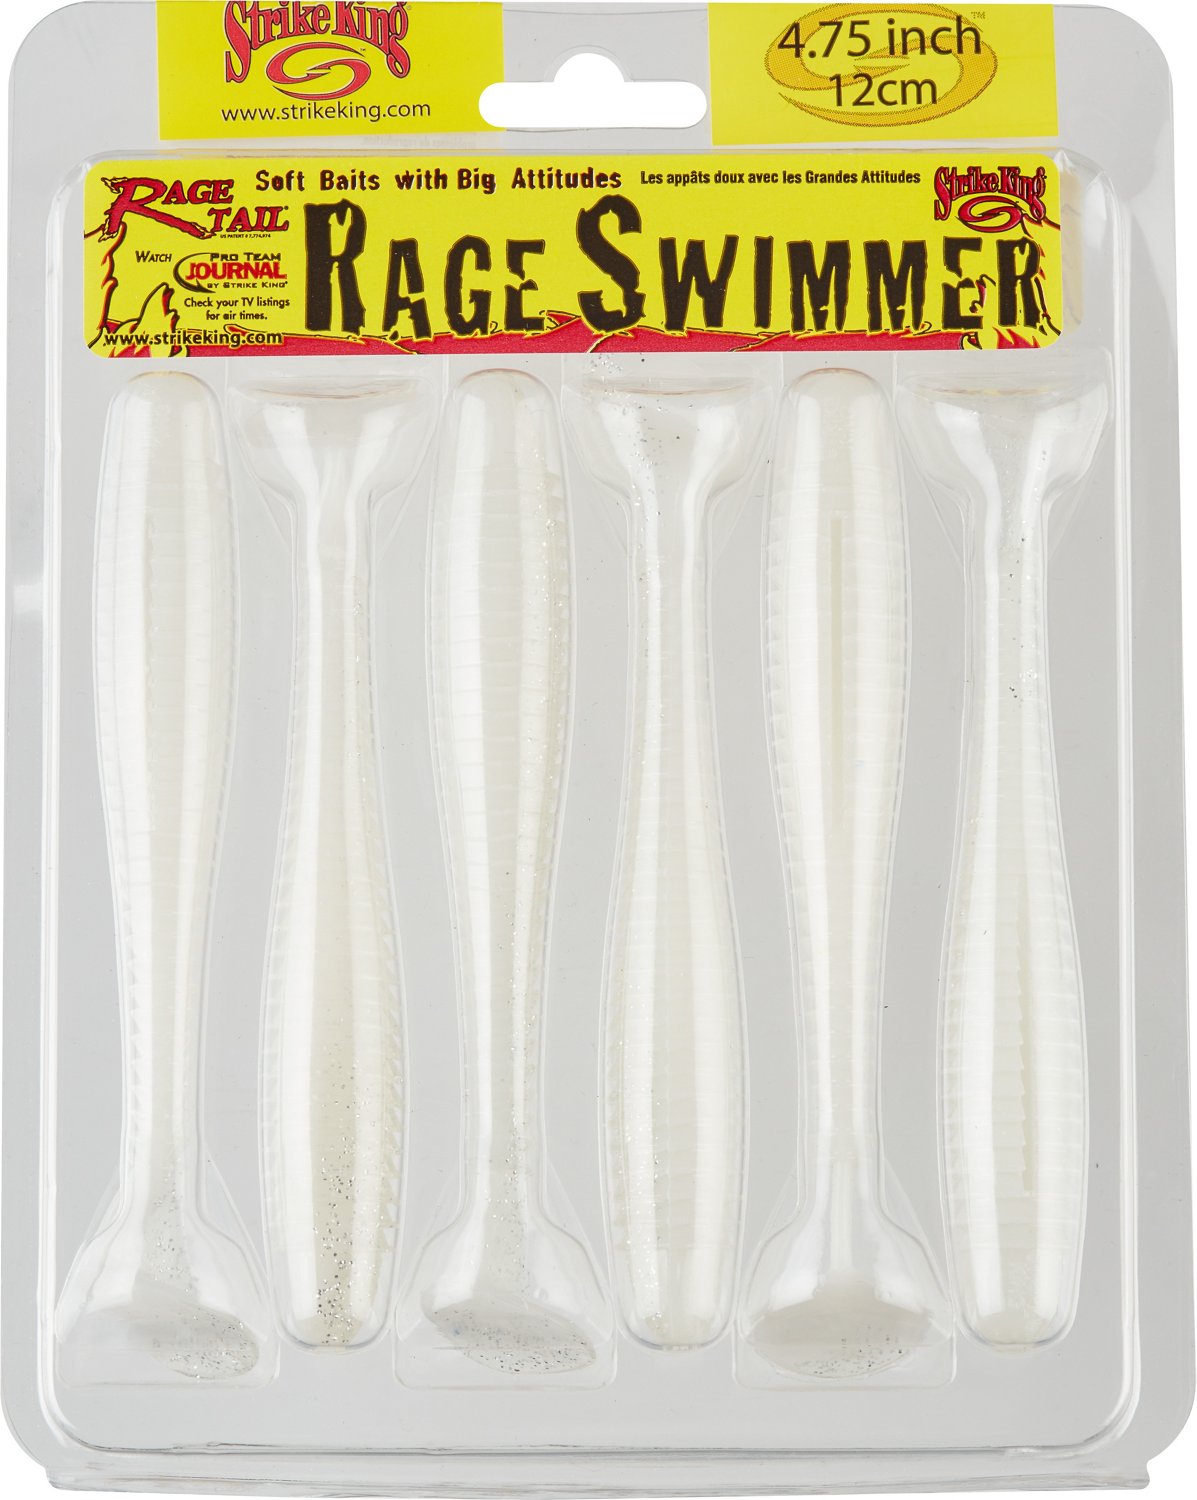 Strike King Rage Tail Rage Swimmer Soft Baits 6-Pack                                                                             - view number 1 selected